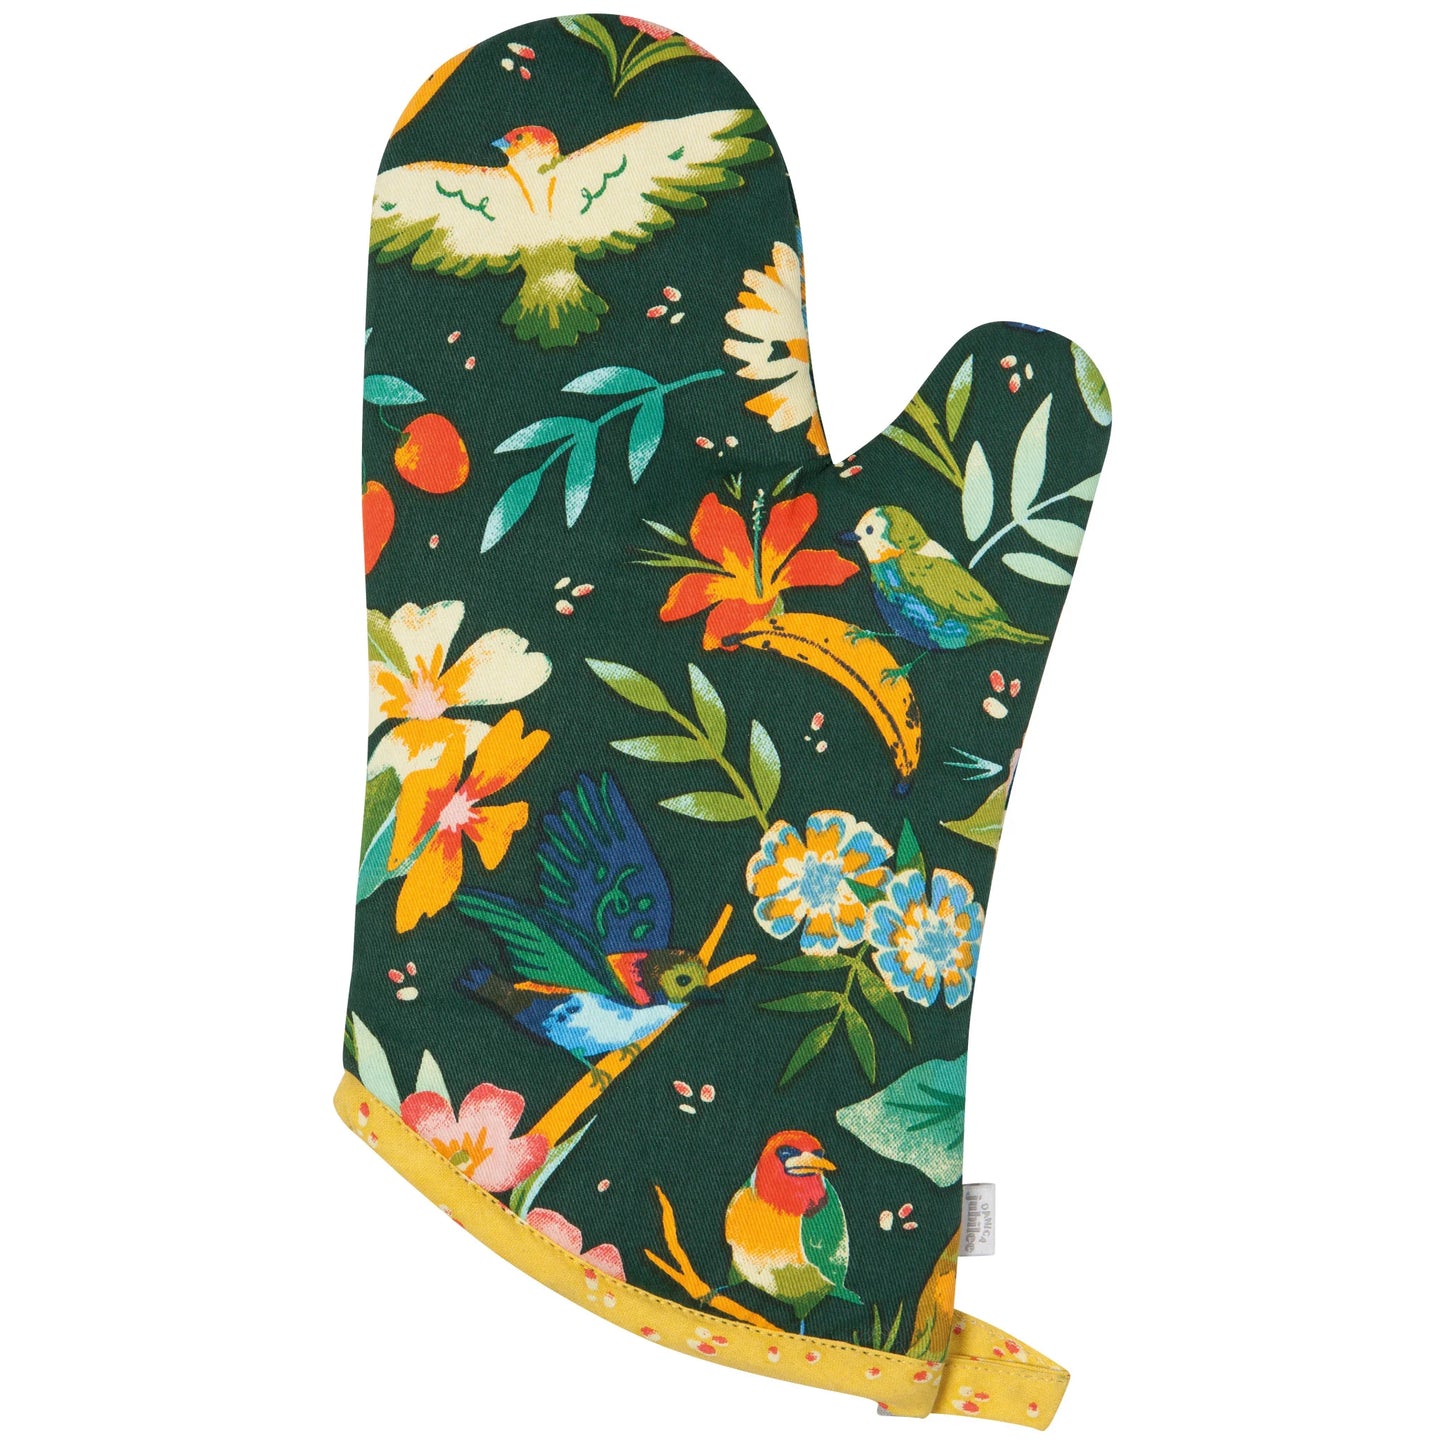 Tropical Trove Oven Mitts Set of 2